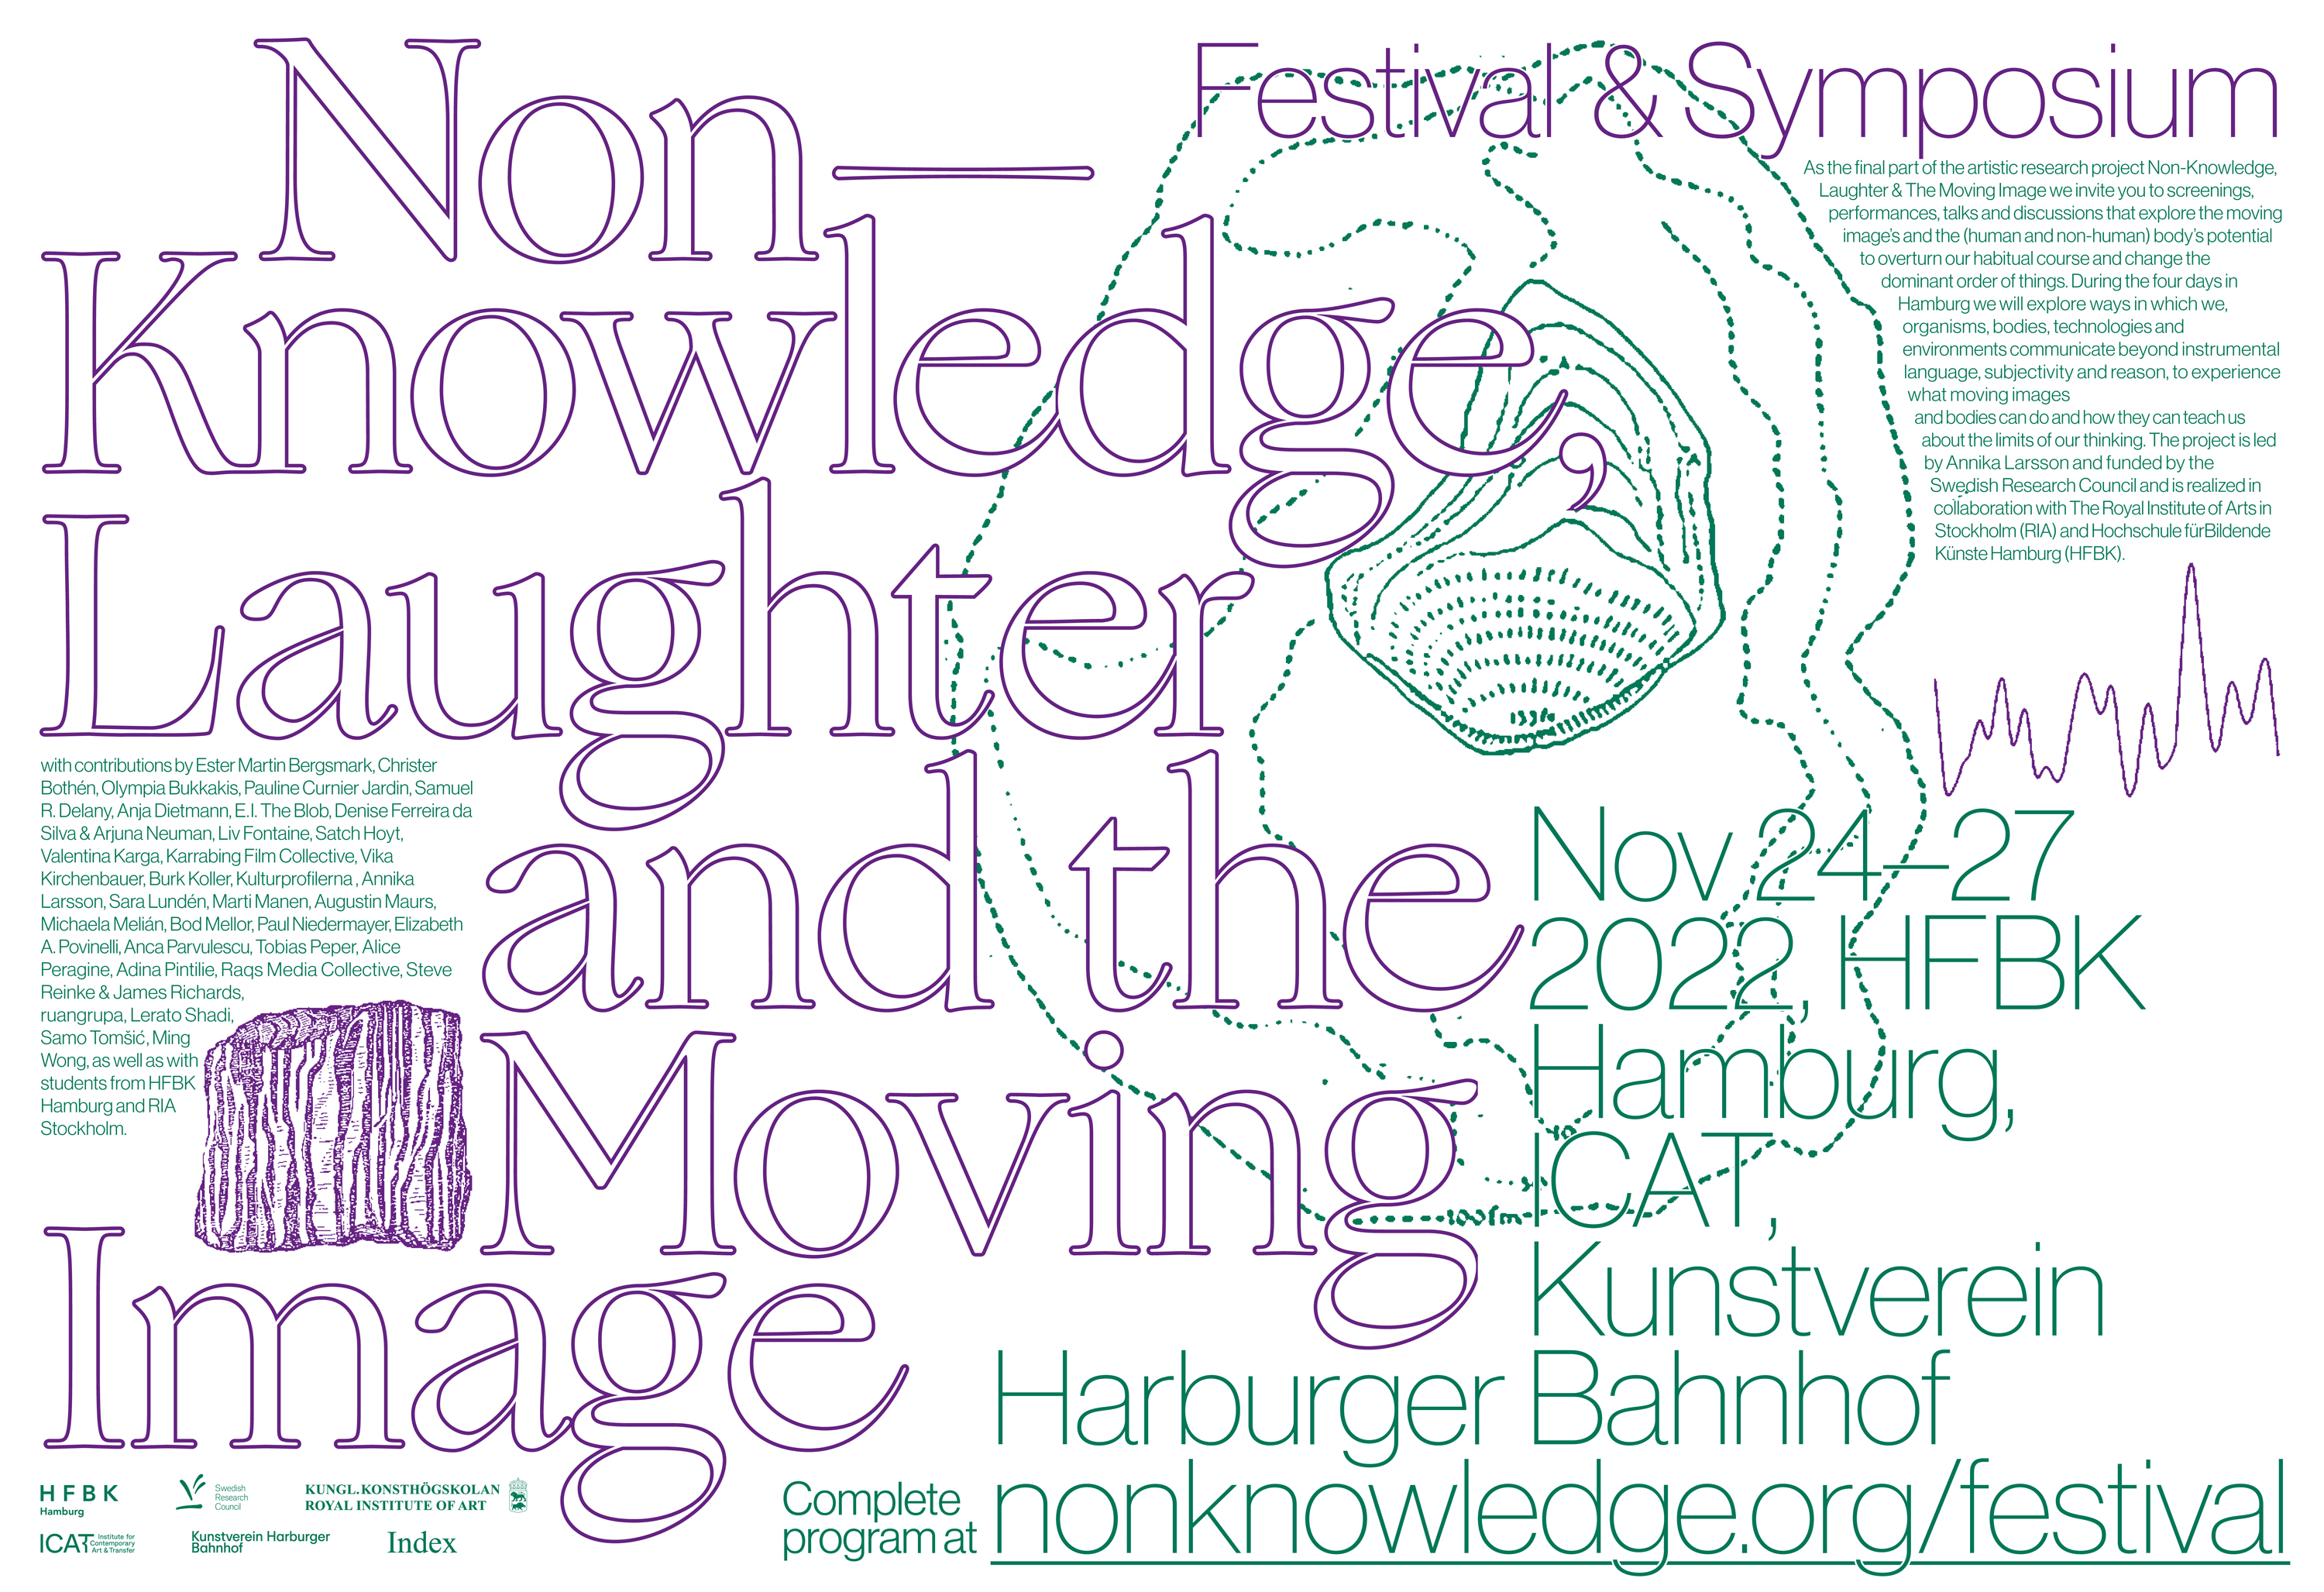 221017 nk festival poster 1 Non Knowledge, Laughter and the Moving Image (Festival & Symposium)